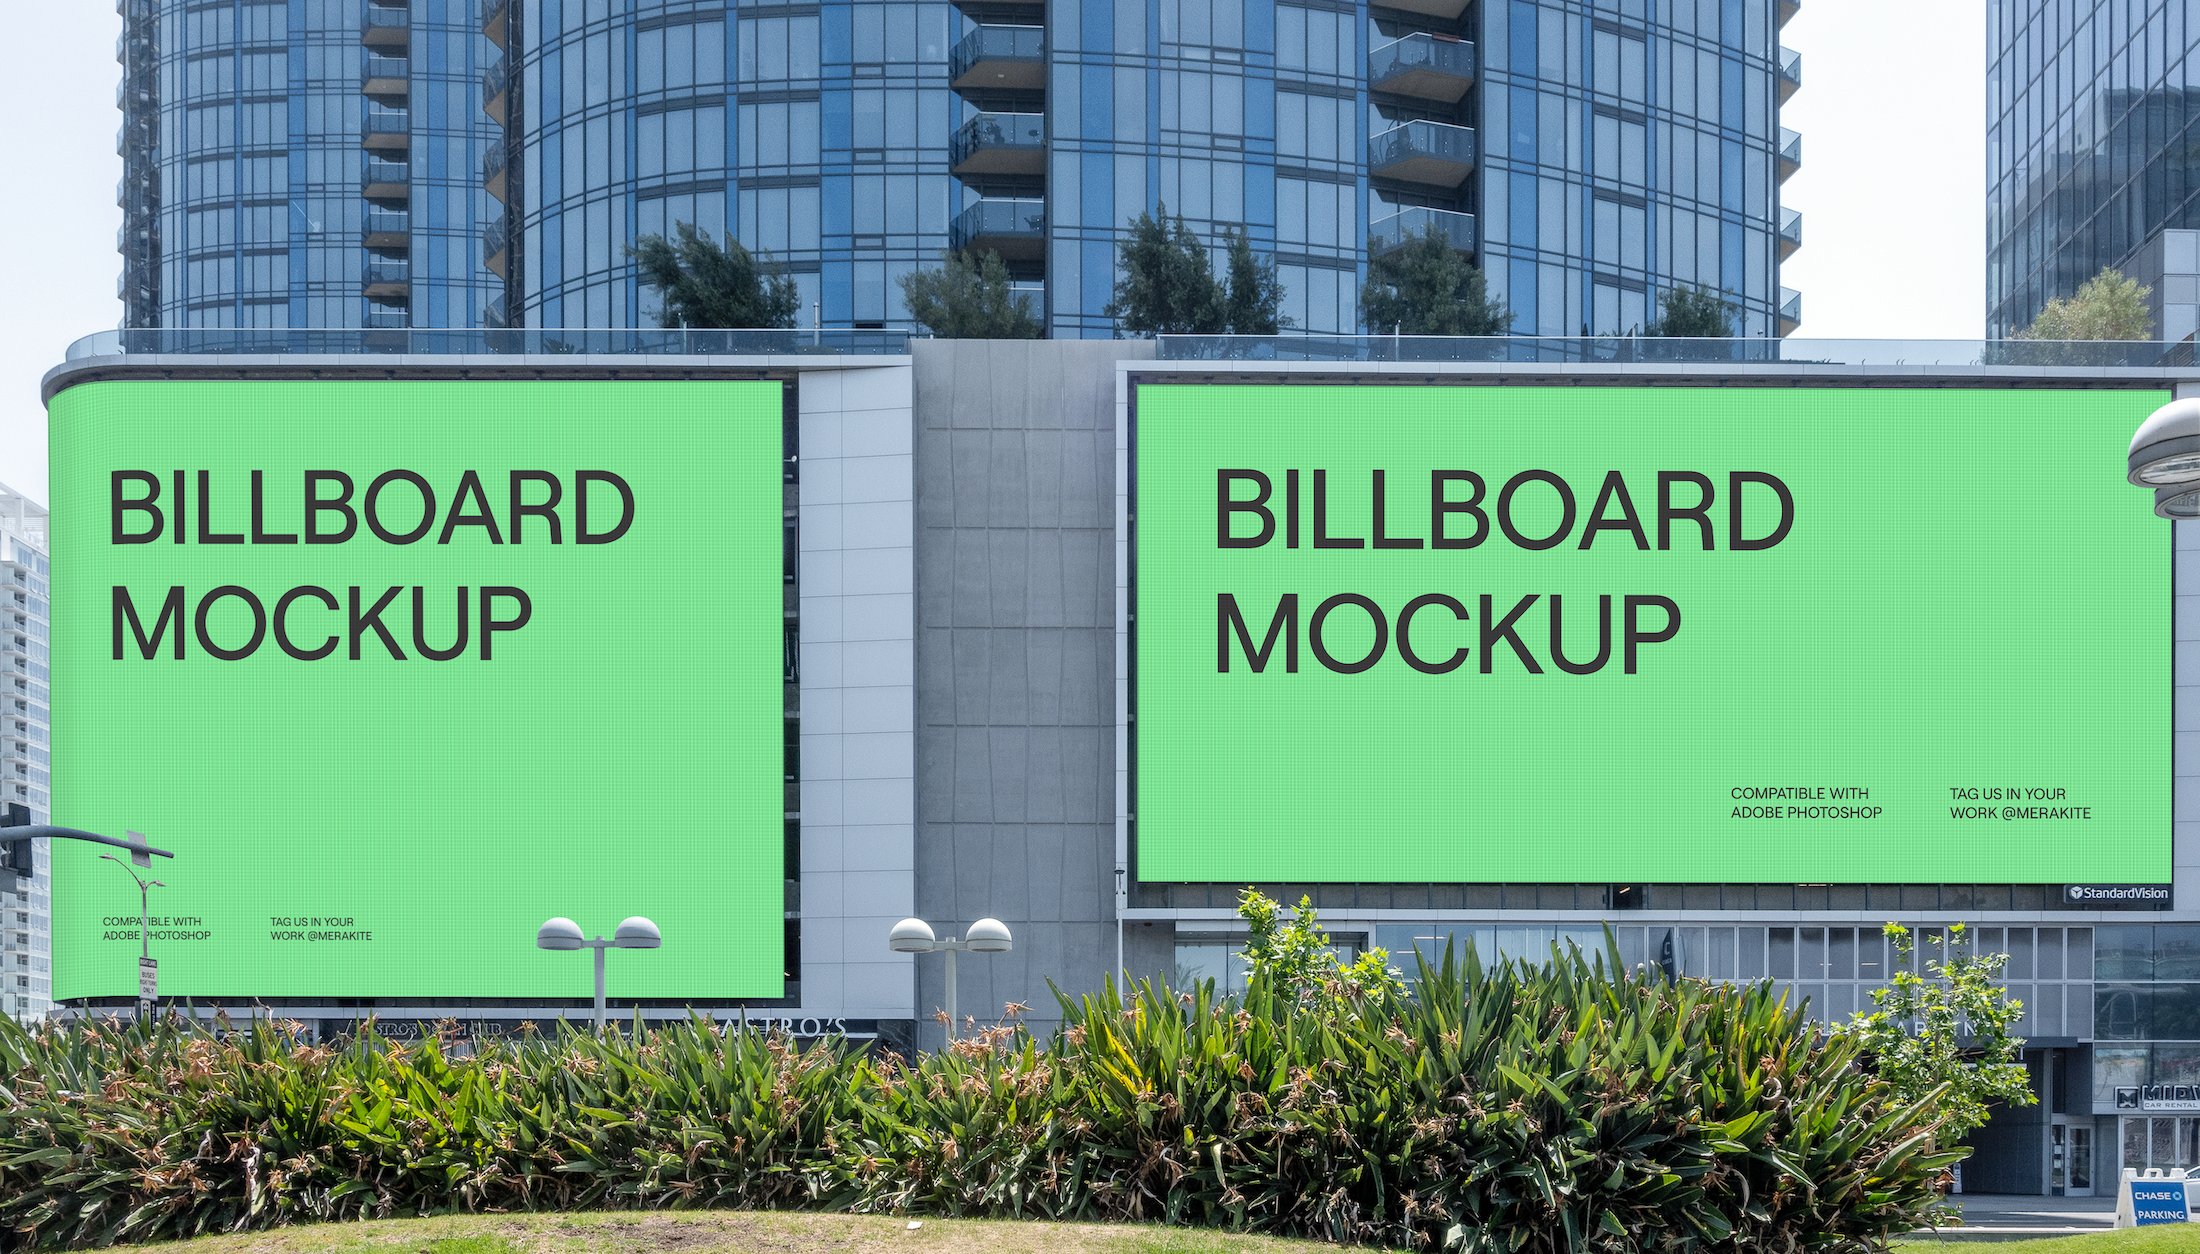 Two Screen City Billboard Mockup PSD cover image.